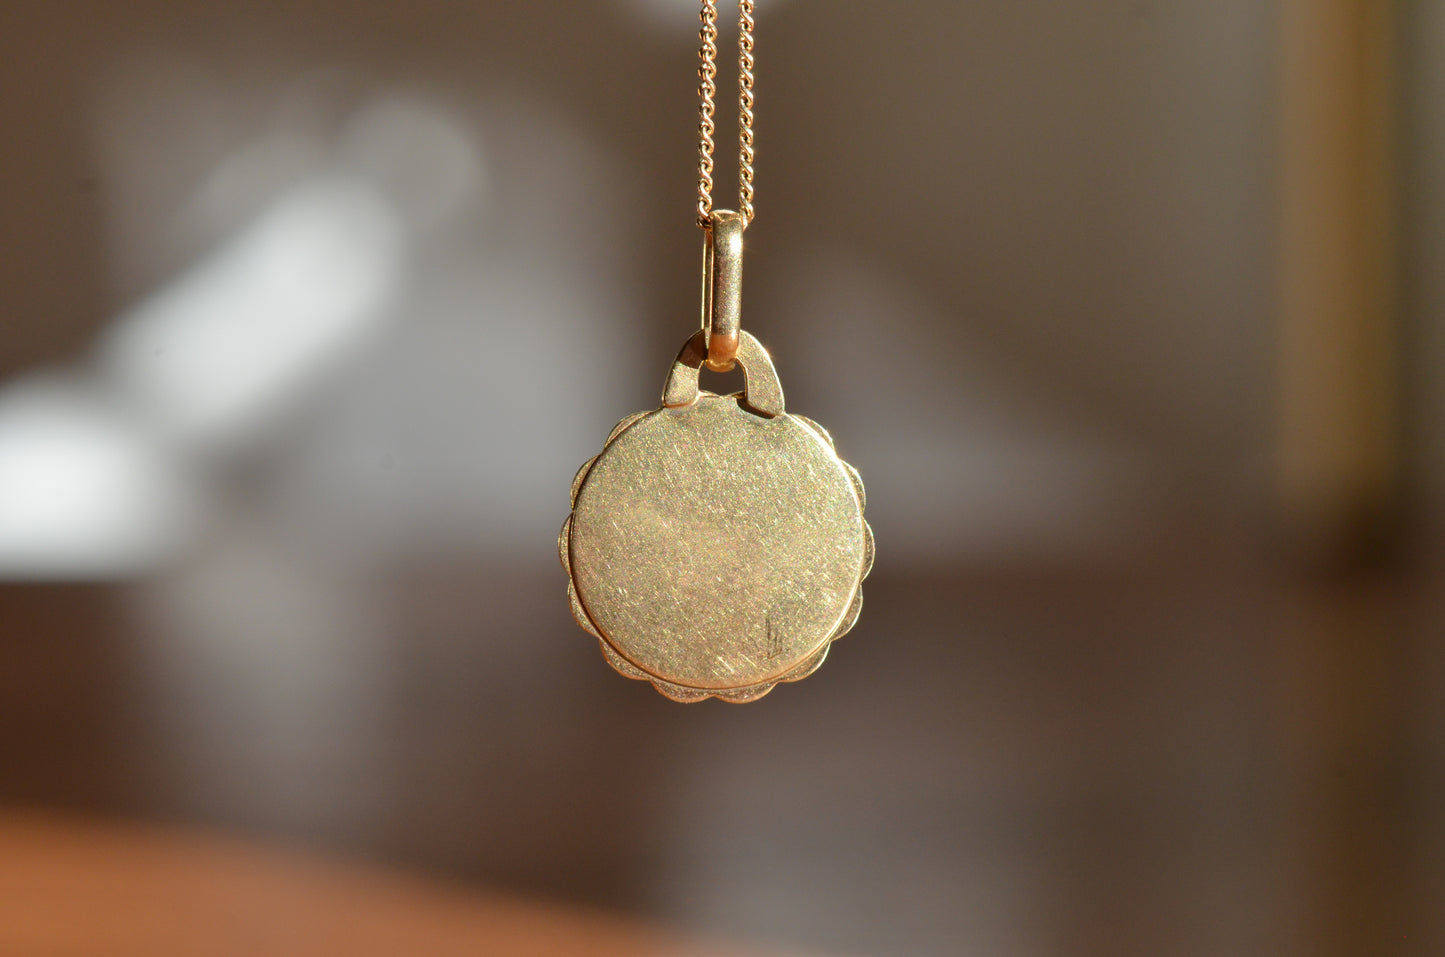 Small Vintage Scalloped Médaille d'Amour